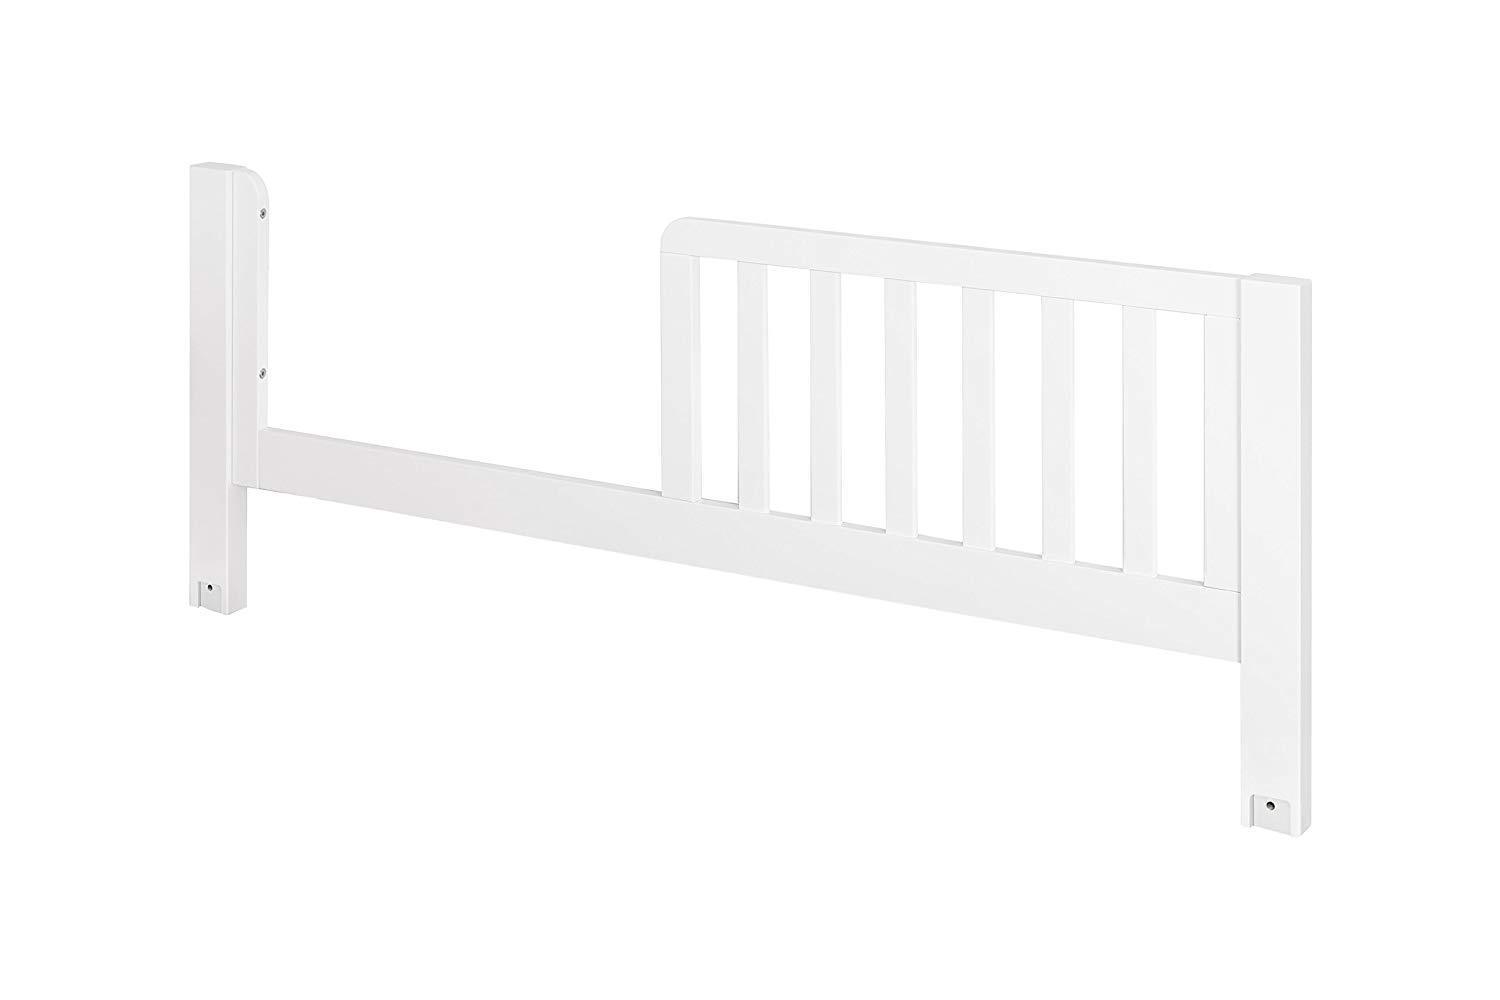 Babyletto Maki Toddler Bed Conversion Kit